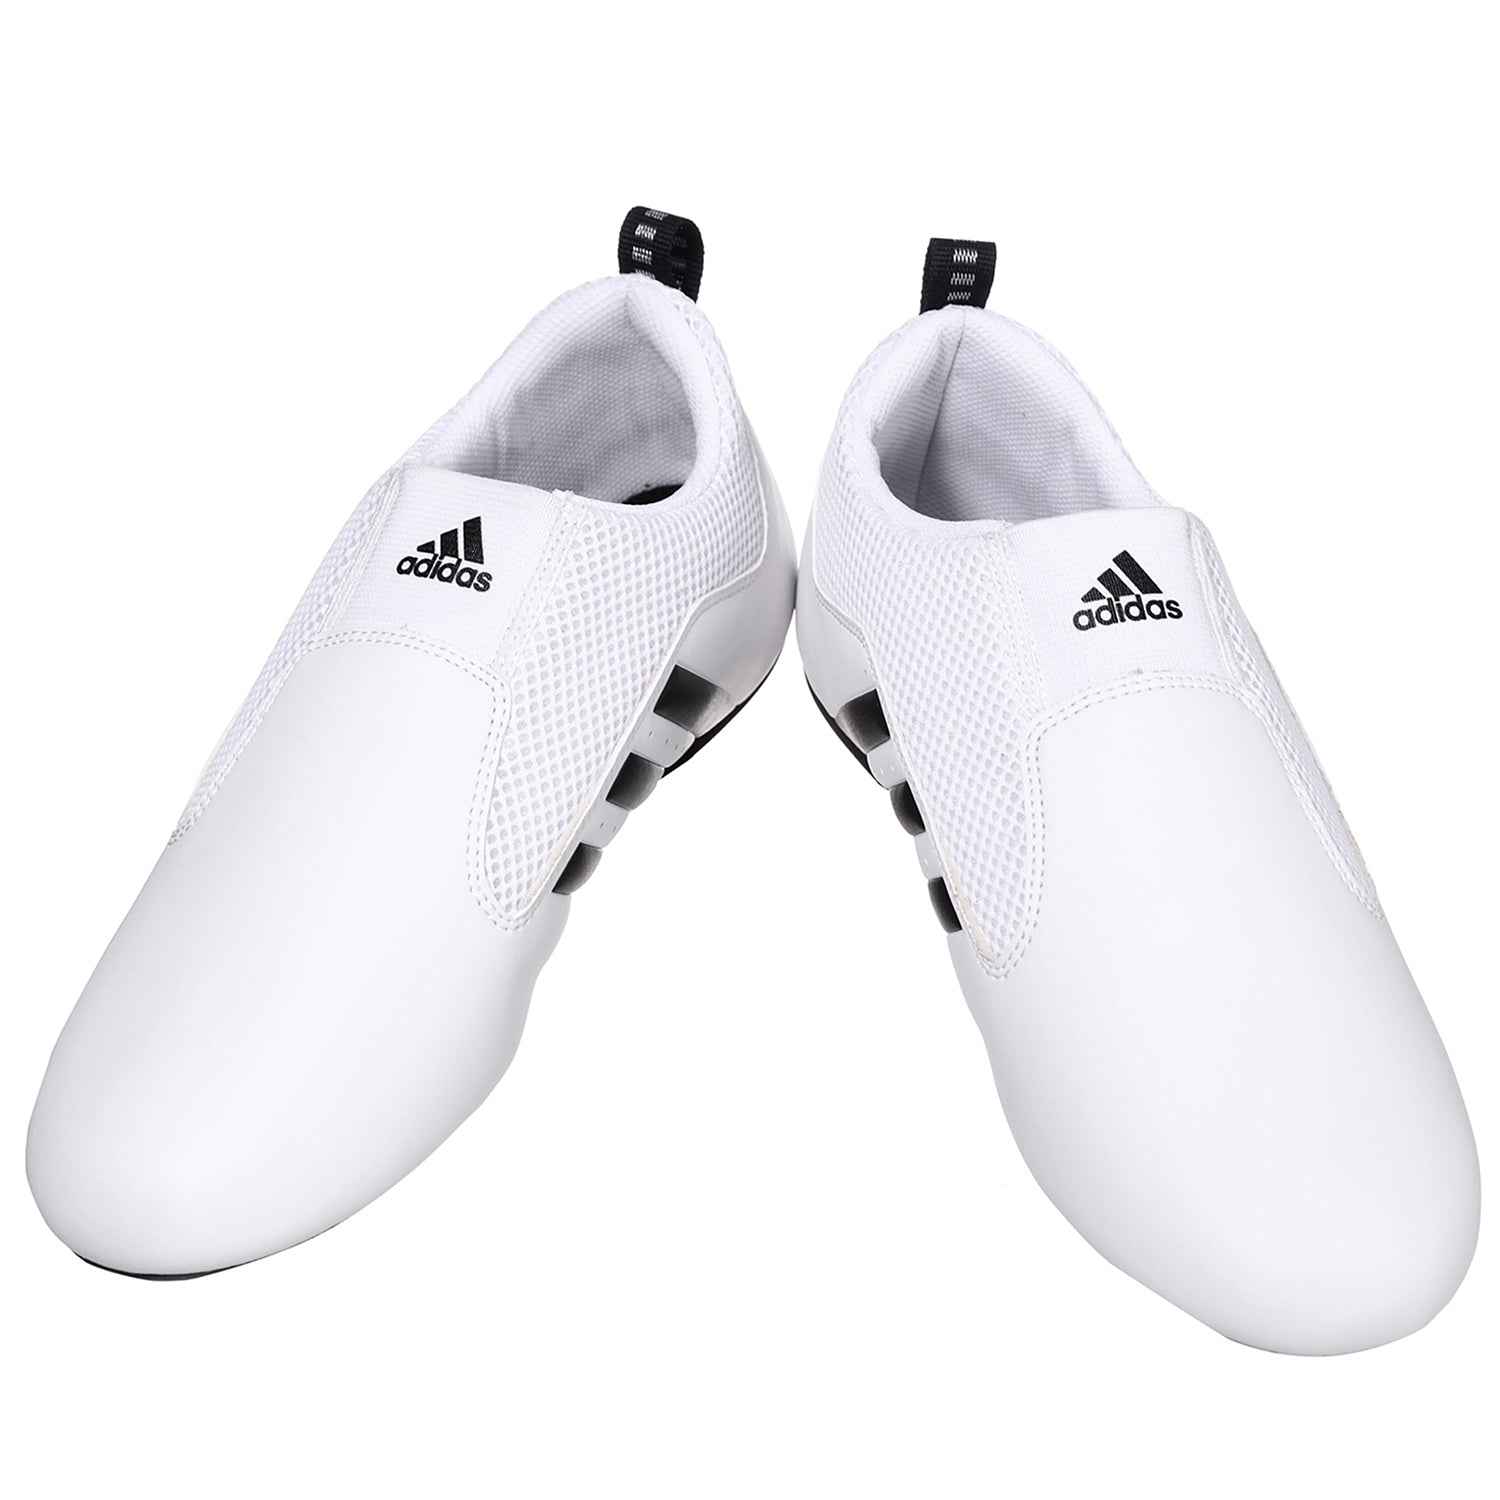 ALL NEW! adidas Contestant-Pro Shoe